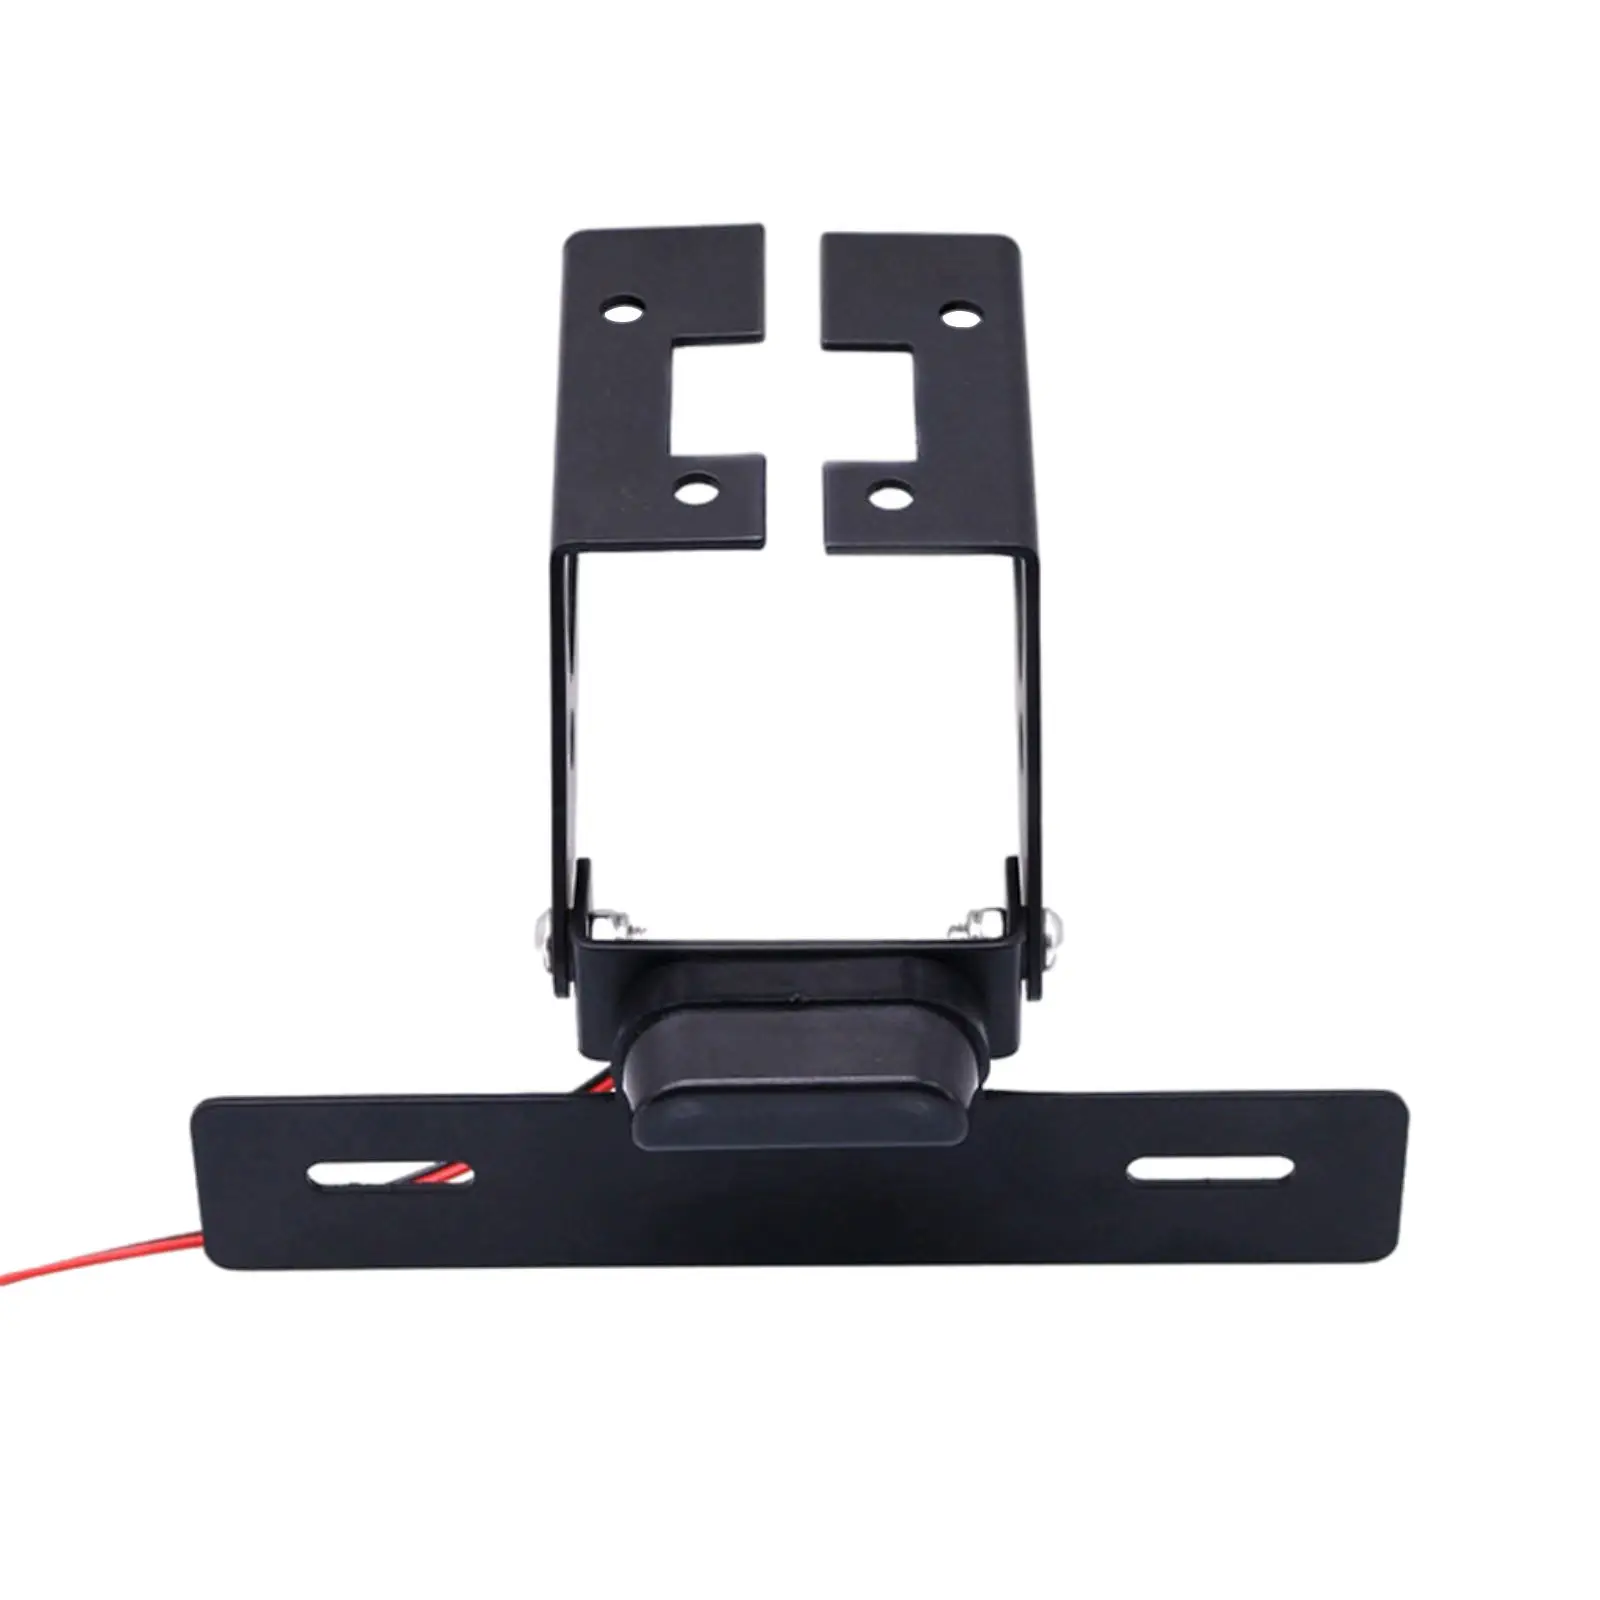 Rear License Plate Bracket Frame Color: Black License Plate Mount Fit for Kawasaki 400 250 2017-2019 Replace Motorcycle